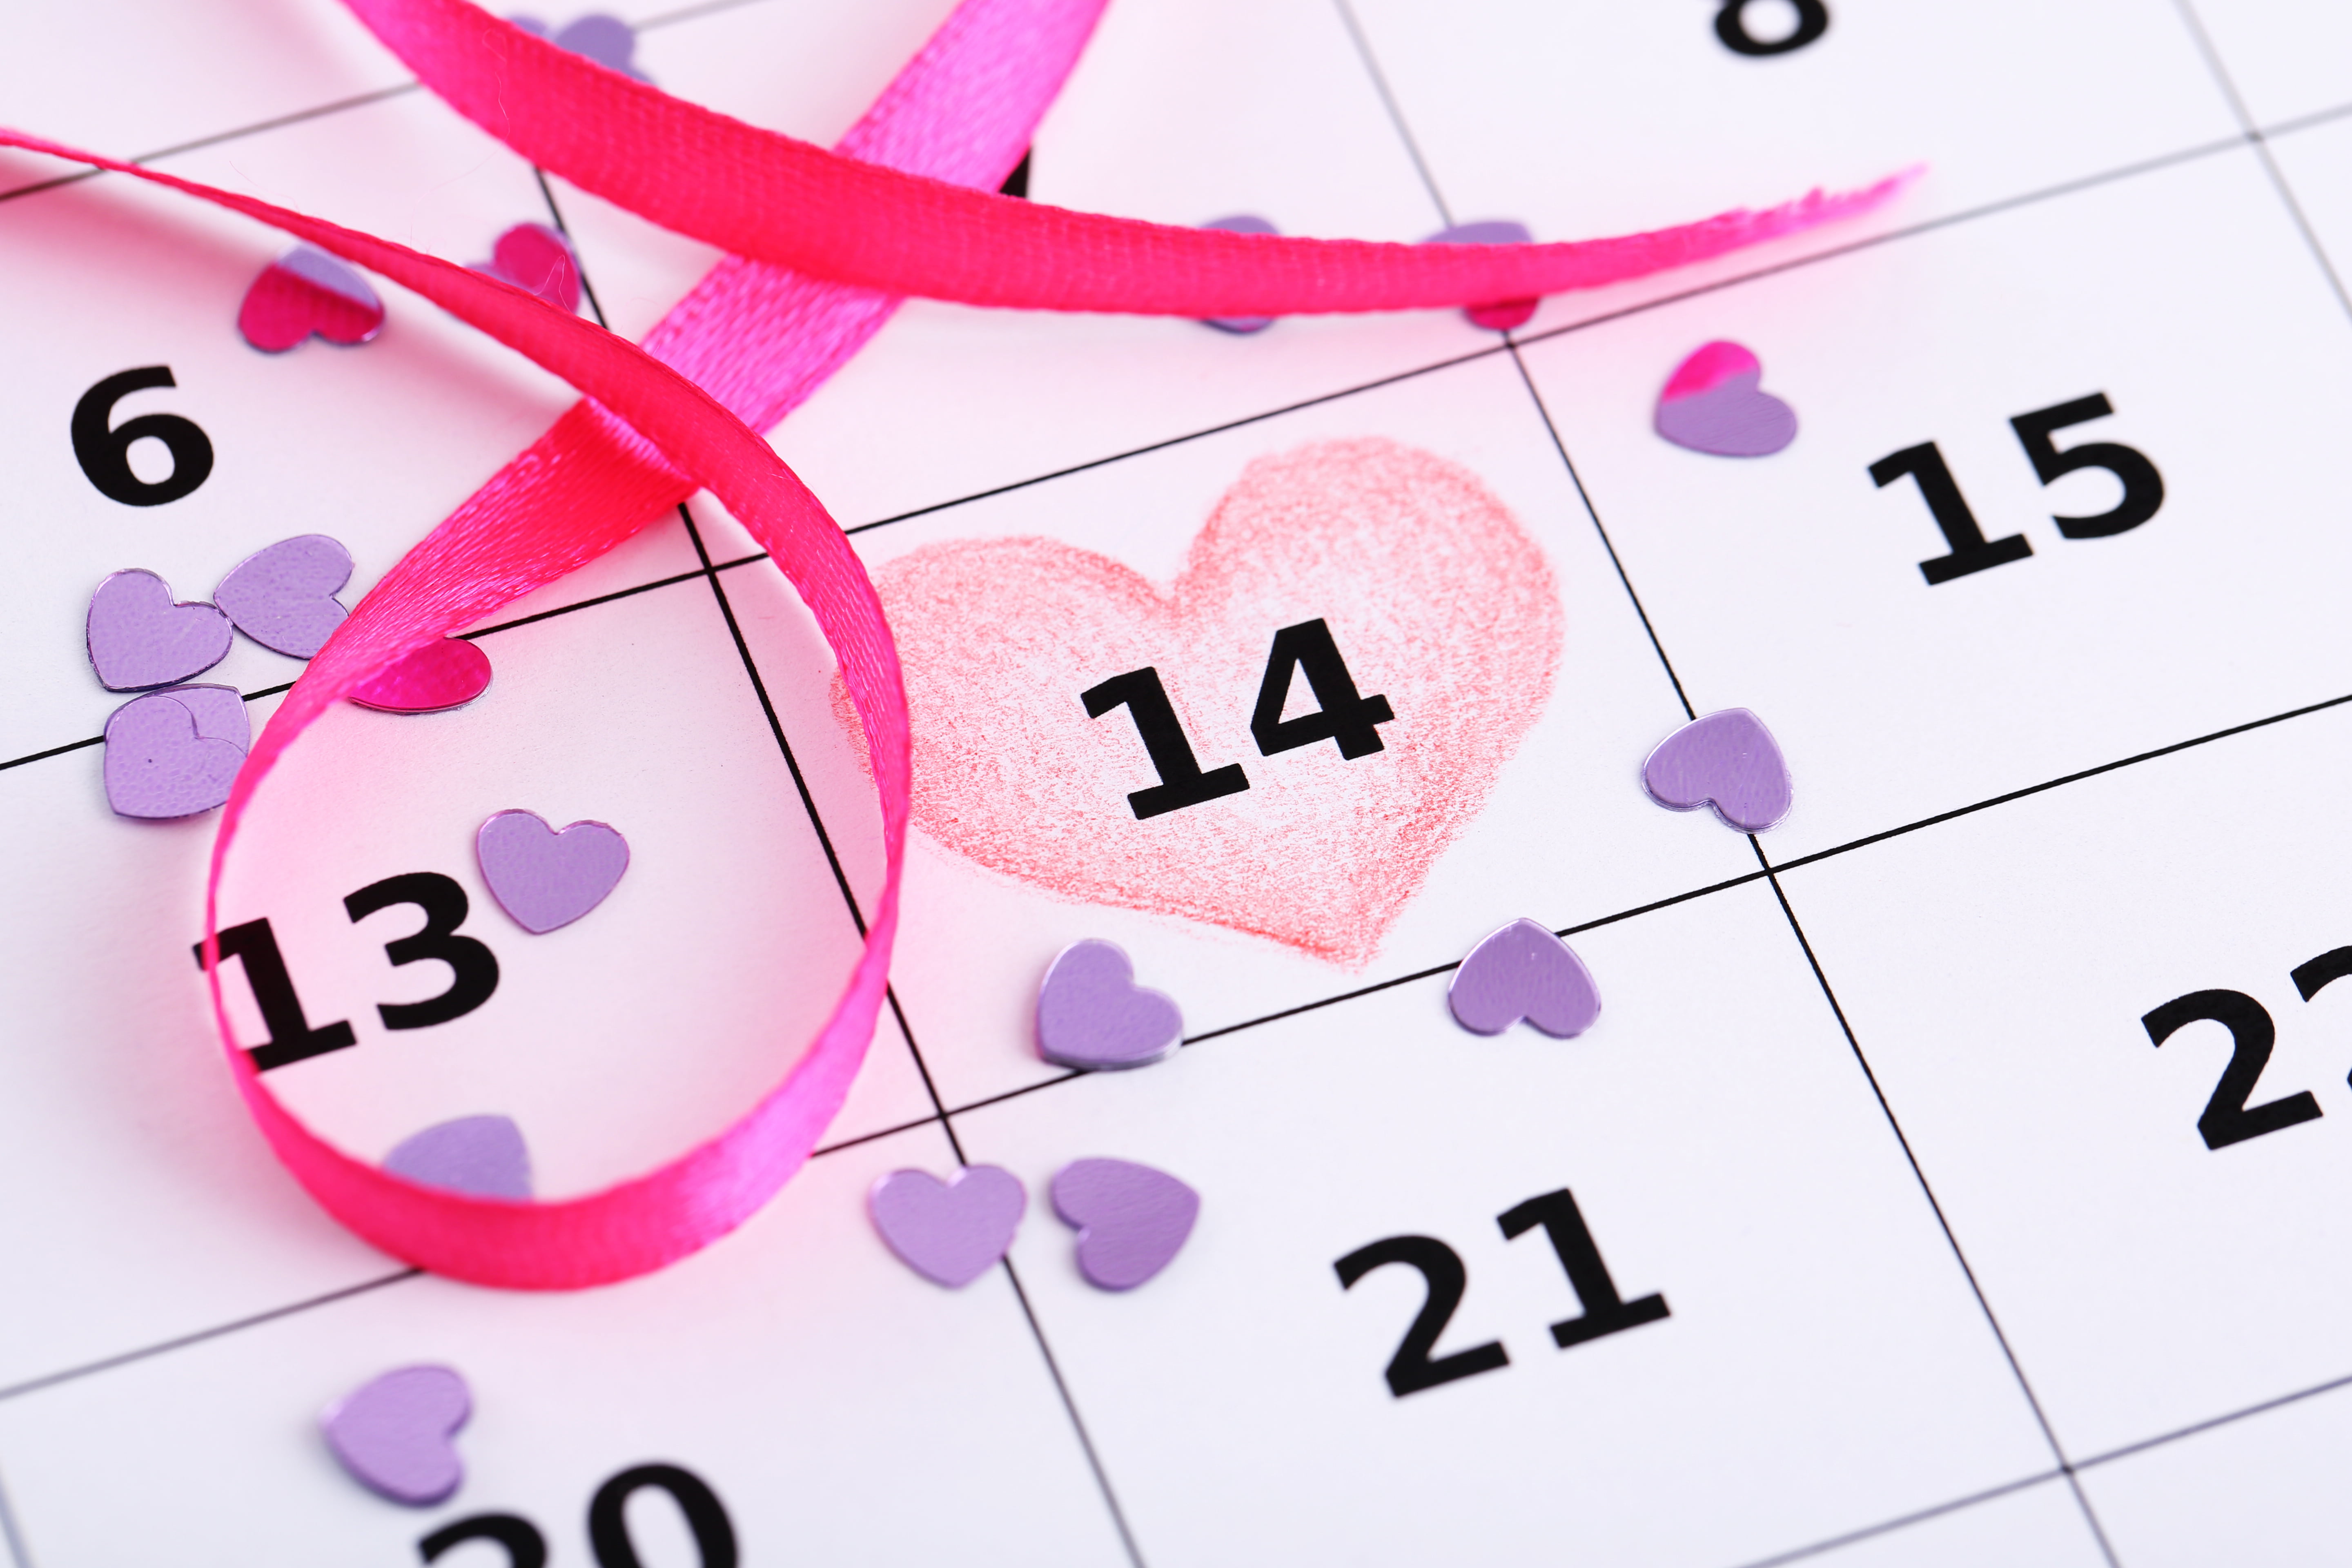 white and black 14 calendar date with heart illustration and pink ribbon lace